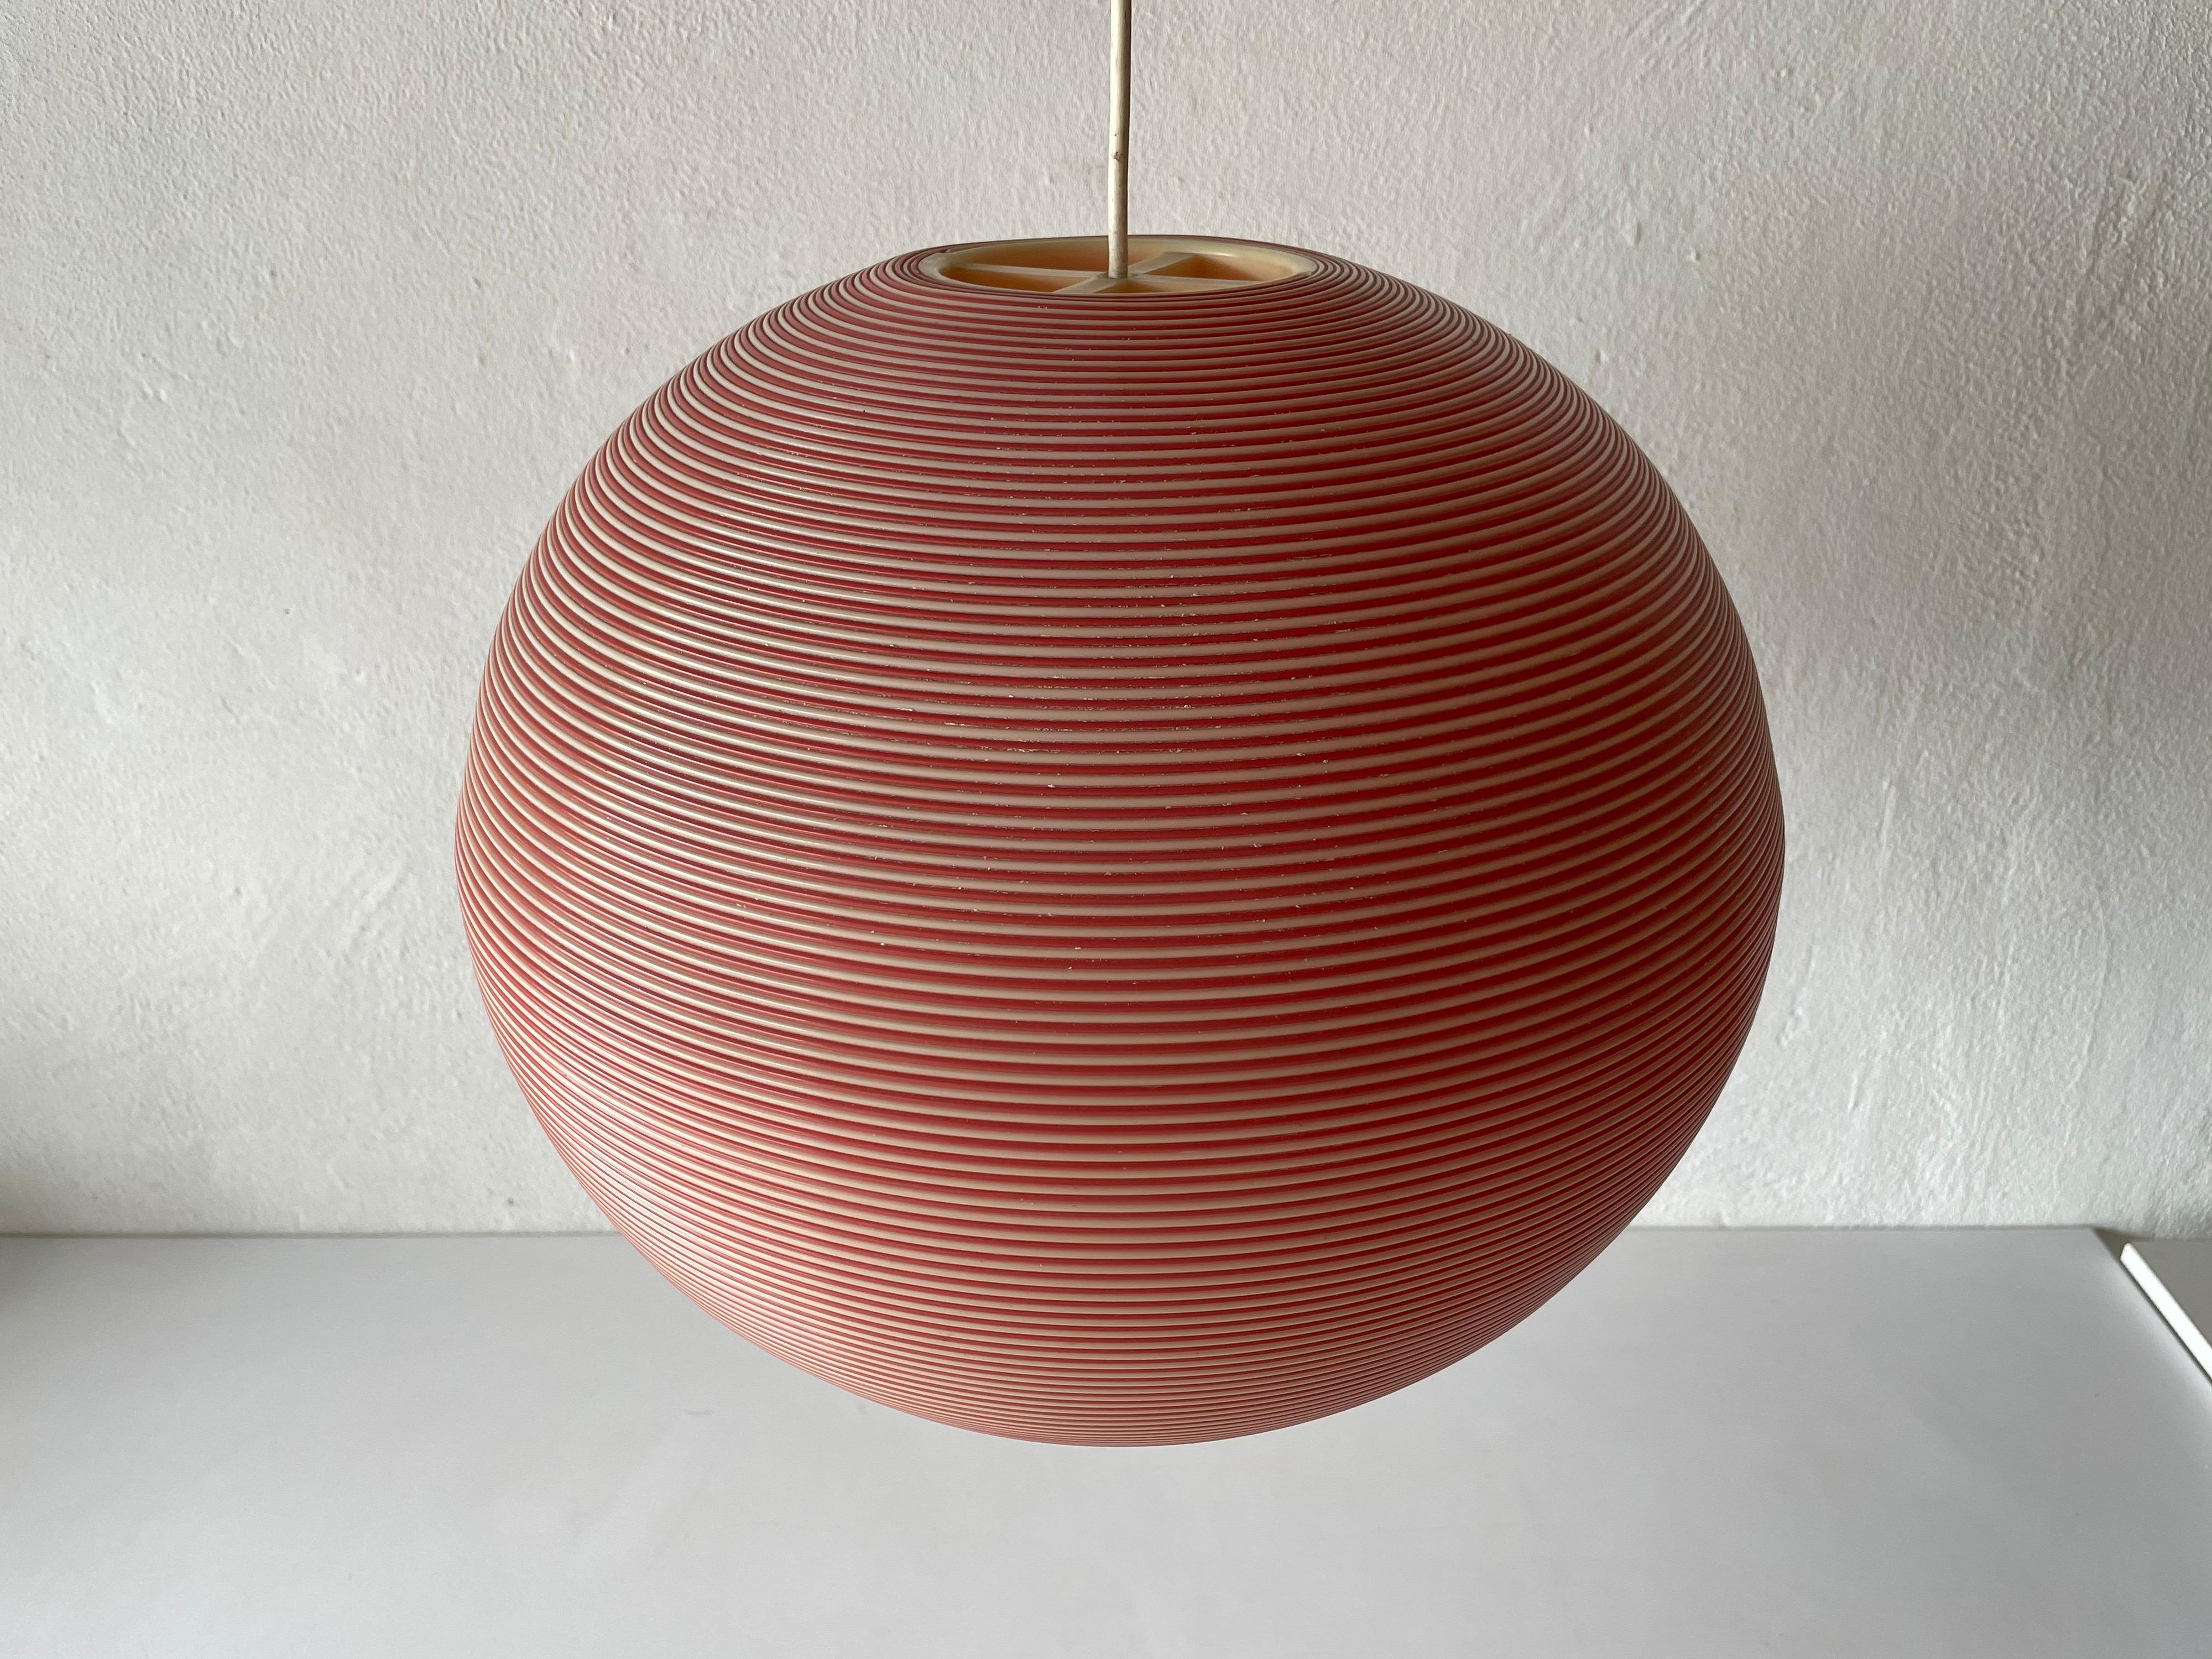 Mid-Century Modern rare red and white sphere shaped rotaflex ceiling lamp by Yasha Heifetz, 
1960s Germany

Elegant and minimal design hanging lamp

Abs plastic (rotaflex) lampshade
Lampshade is in good condition and very clean. 
This lamp